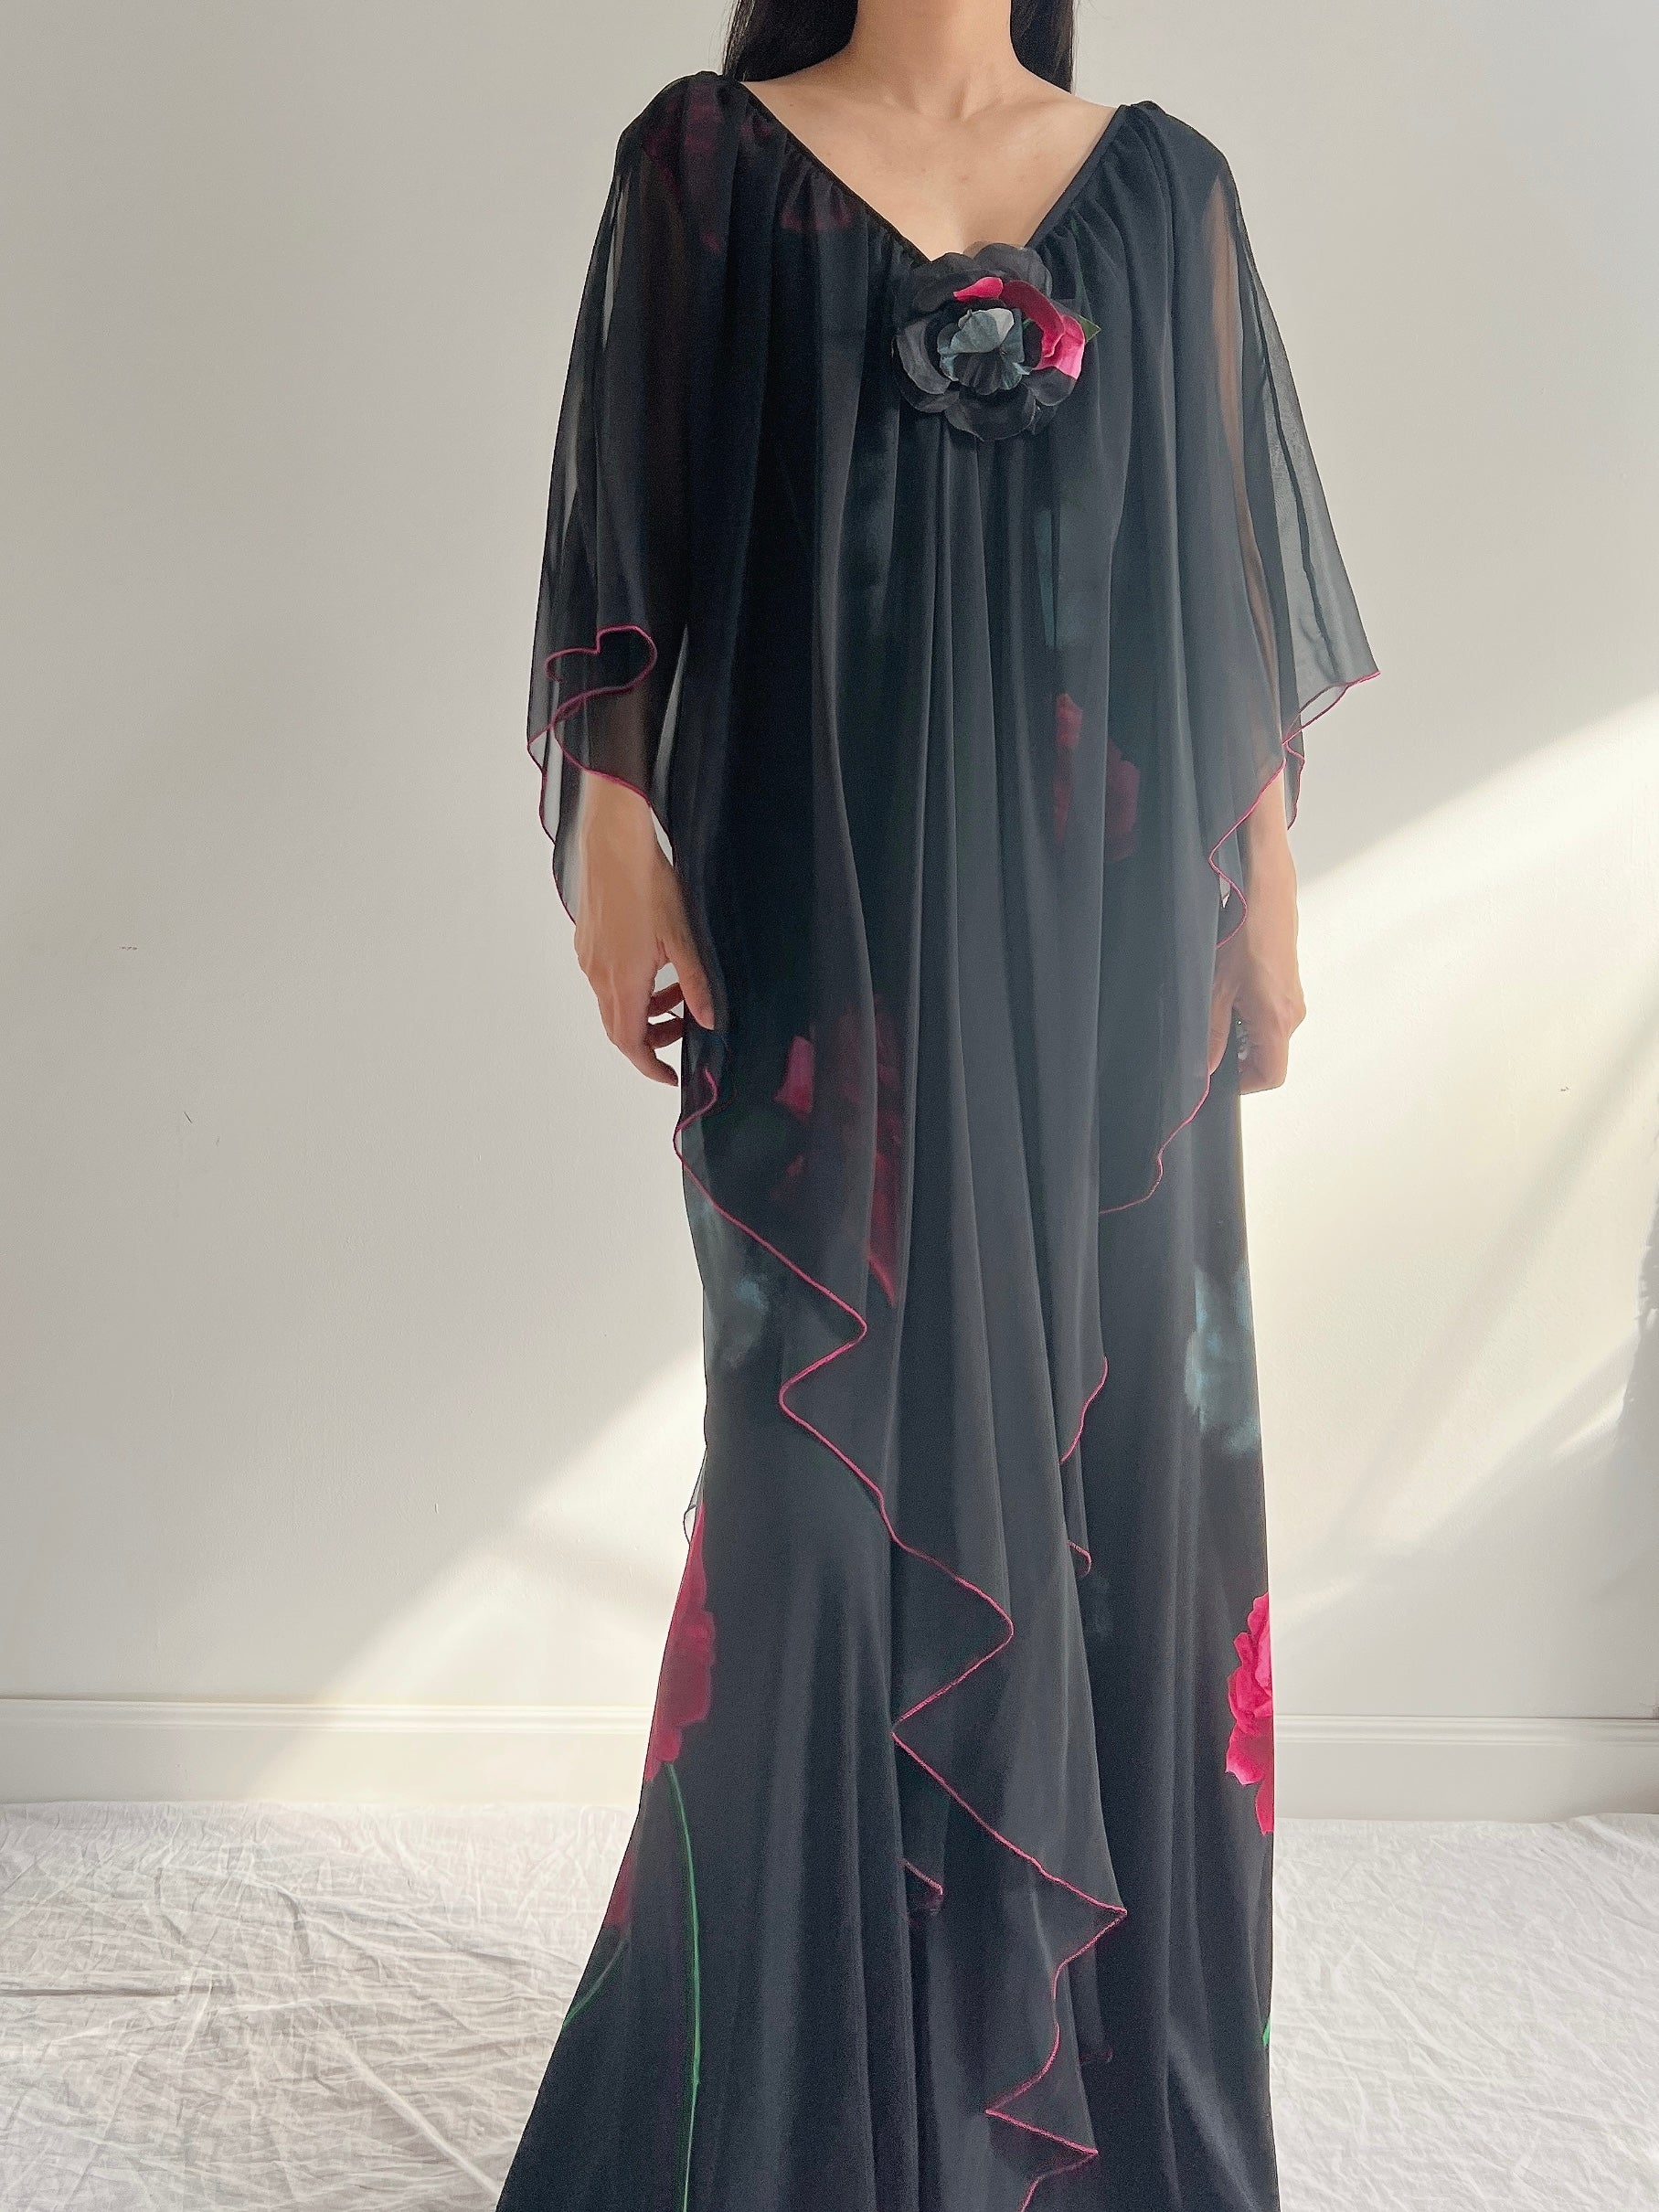 1960s Jersey and Chiffon Floral Gown - S